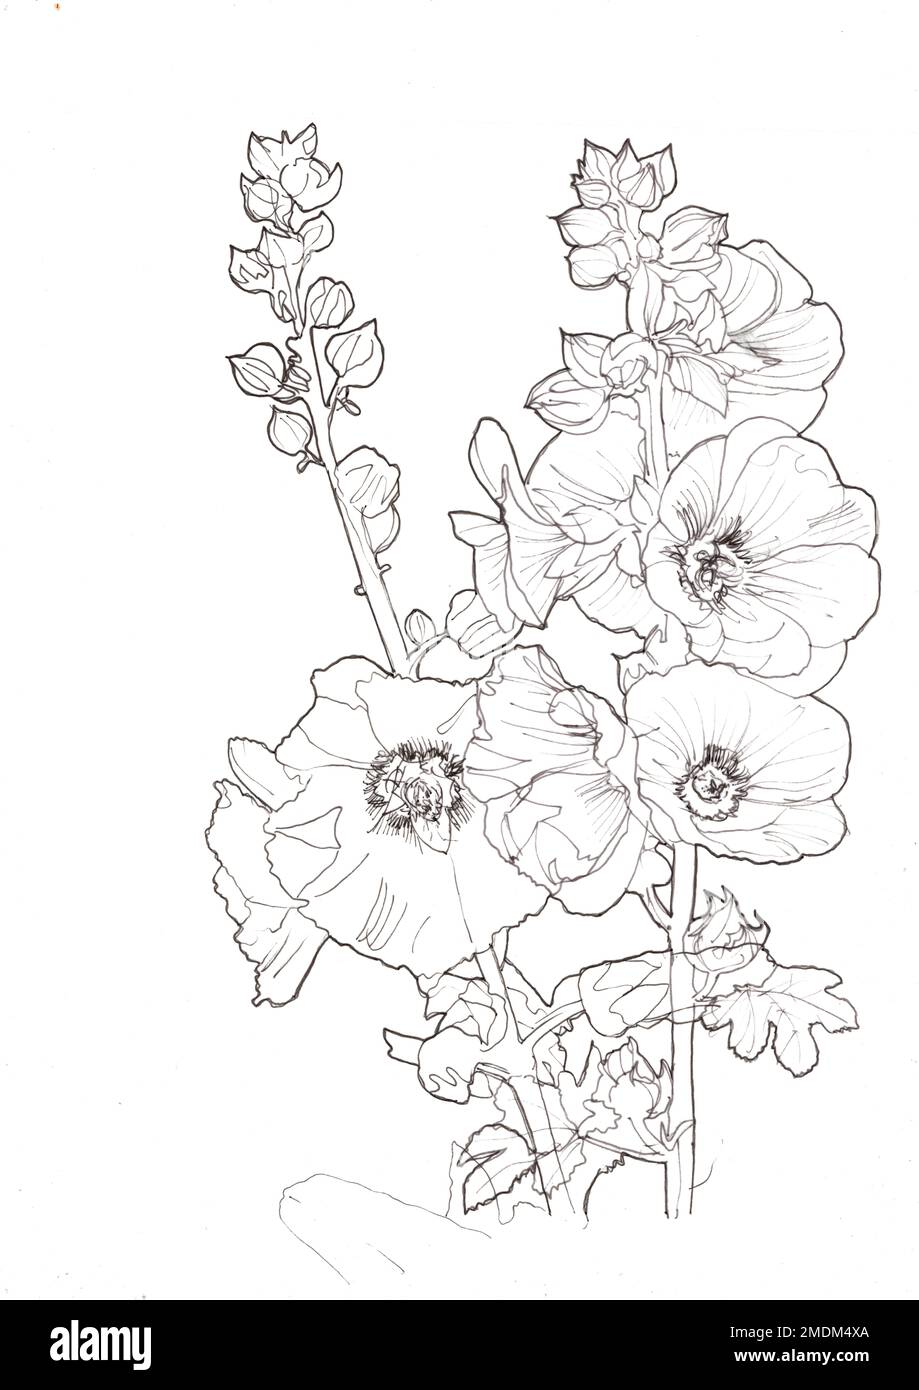 Black and white pencil sketch hollyhock flowers and leaves. Stock Photo